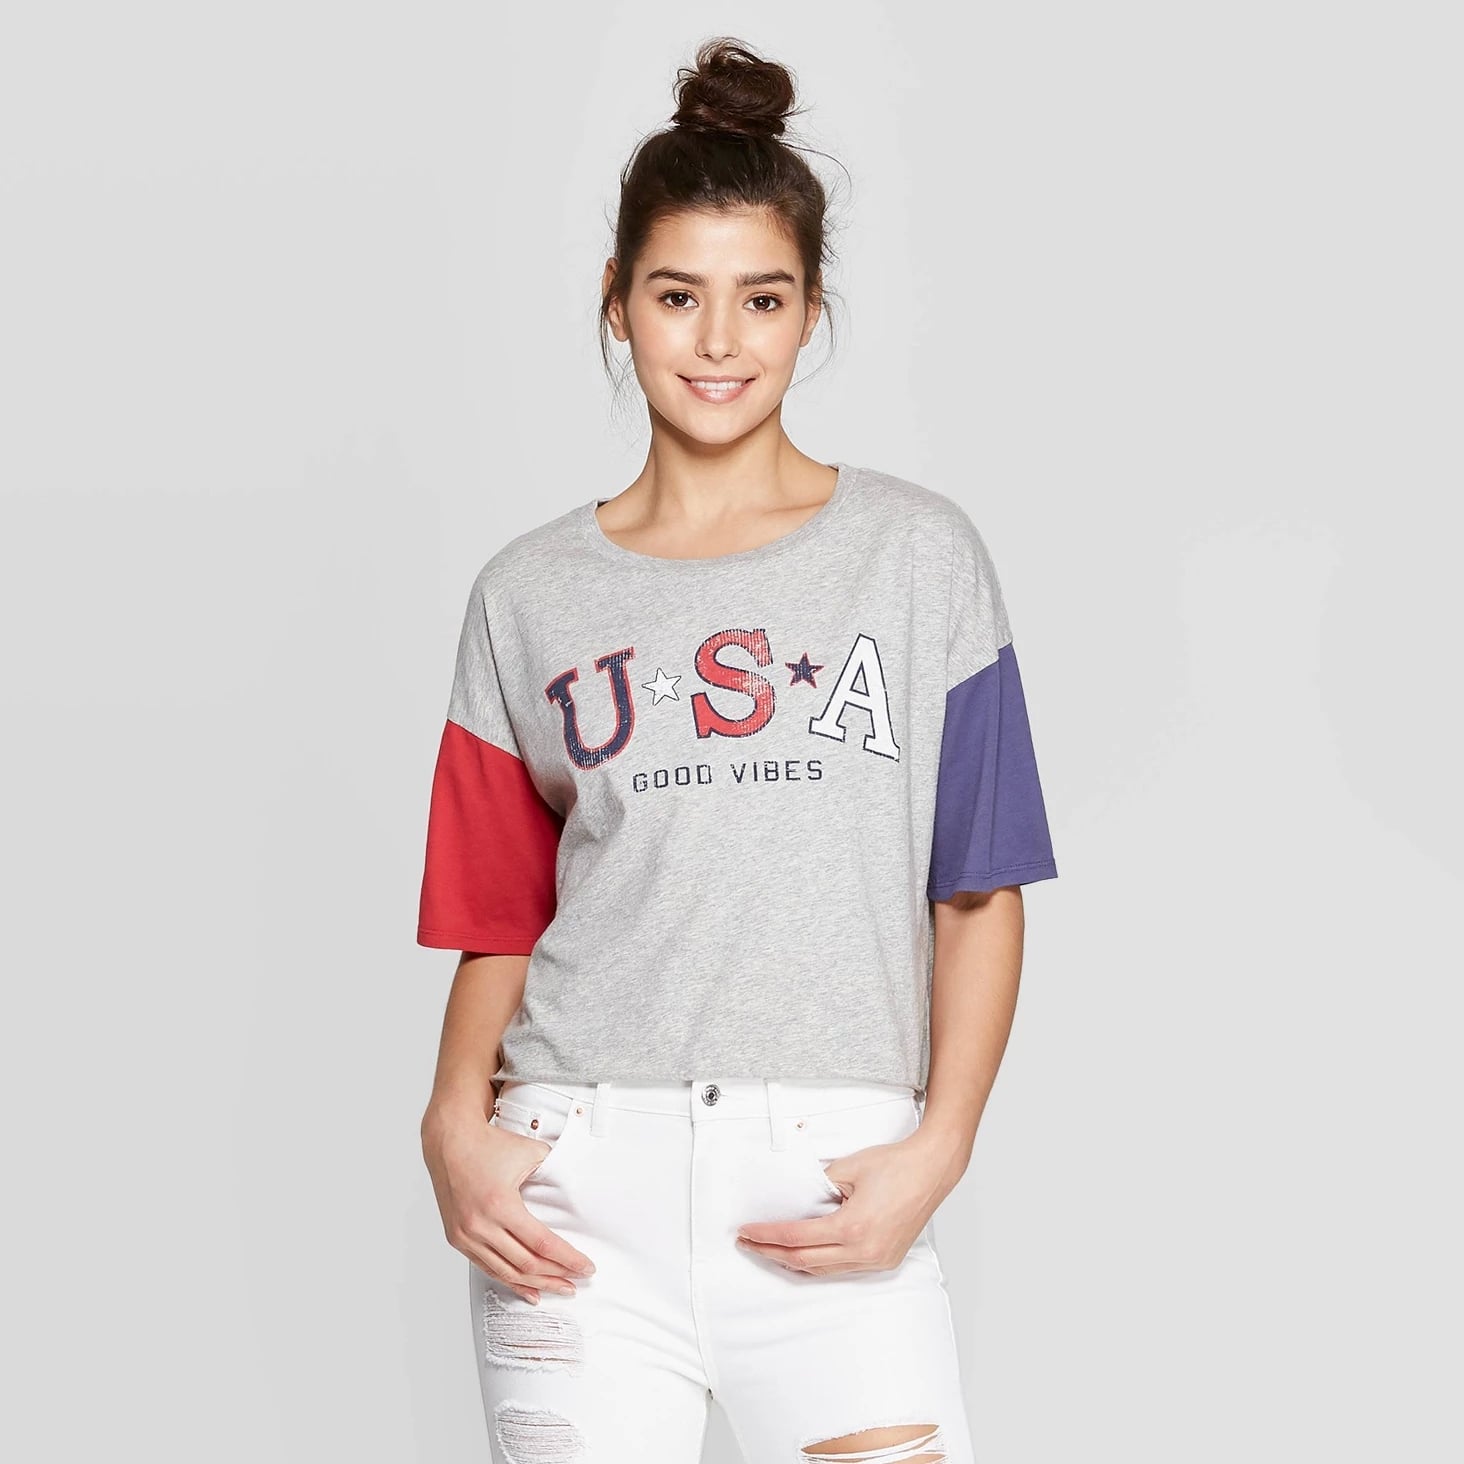 Good Vibes Short-Sleeve Unisex T-Shirt Kyndness July 4th Holiday Shirt Barbecue America 